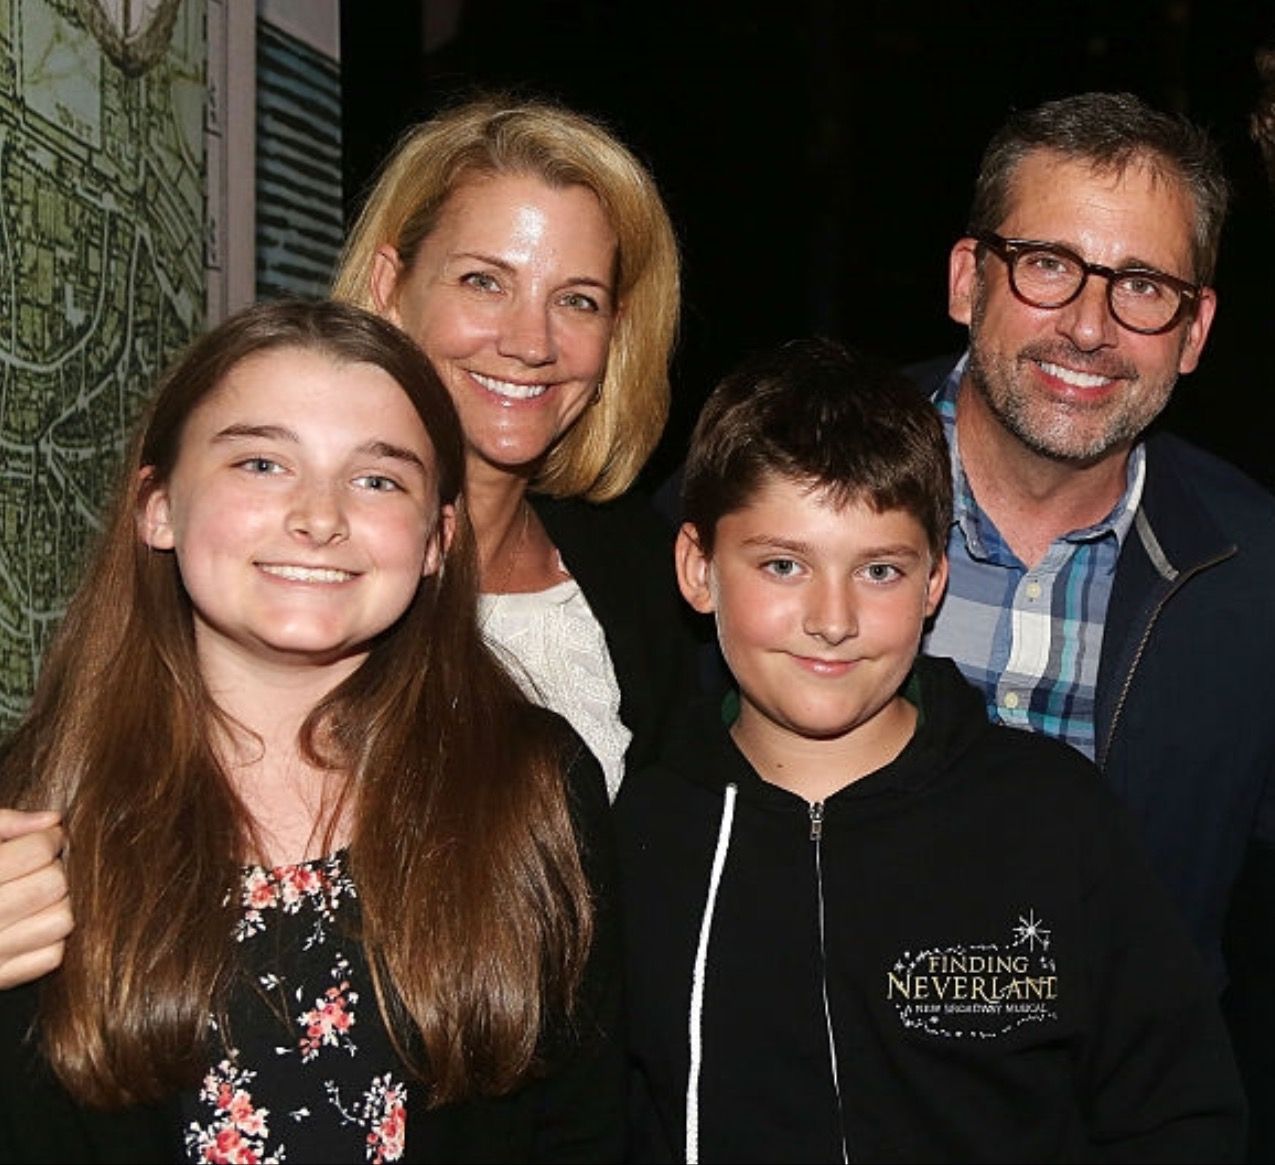 Steve Carell with wife Nancy and children Annie and John, 2015